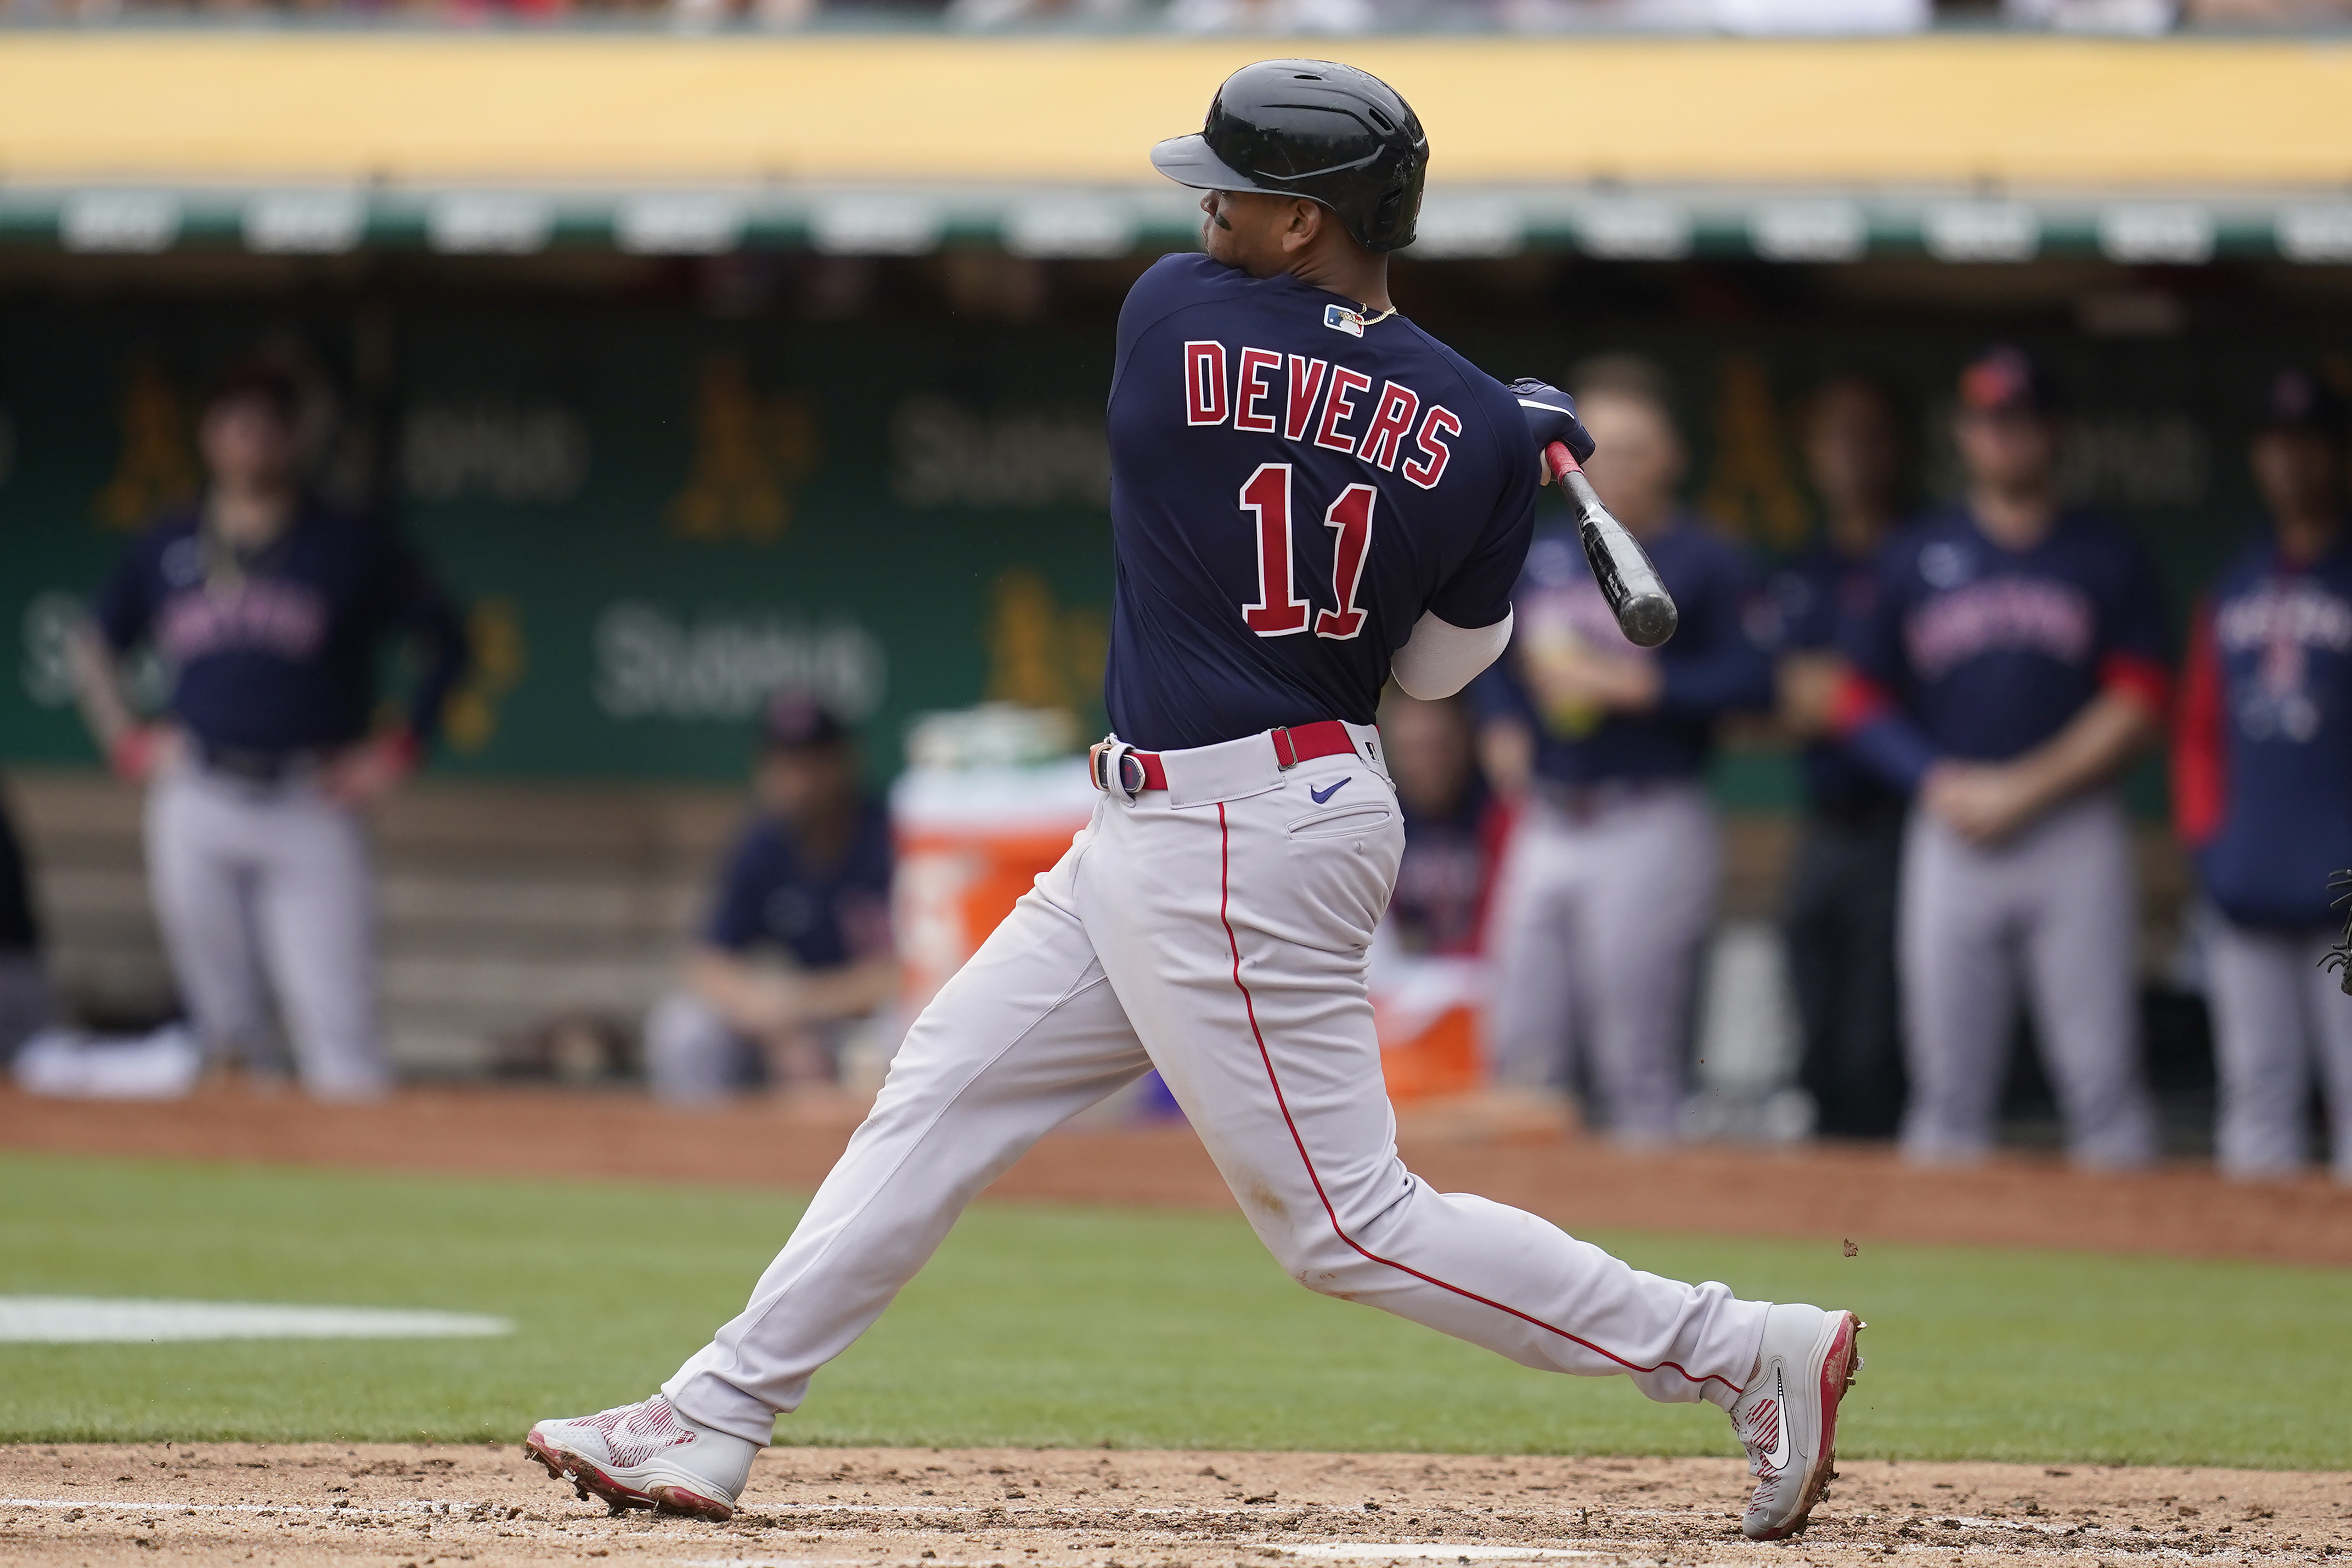 Rafael Devers injury update: Red Sox 3B returns to lineup Wednesday vs. A's  - DraftKings Network